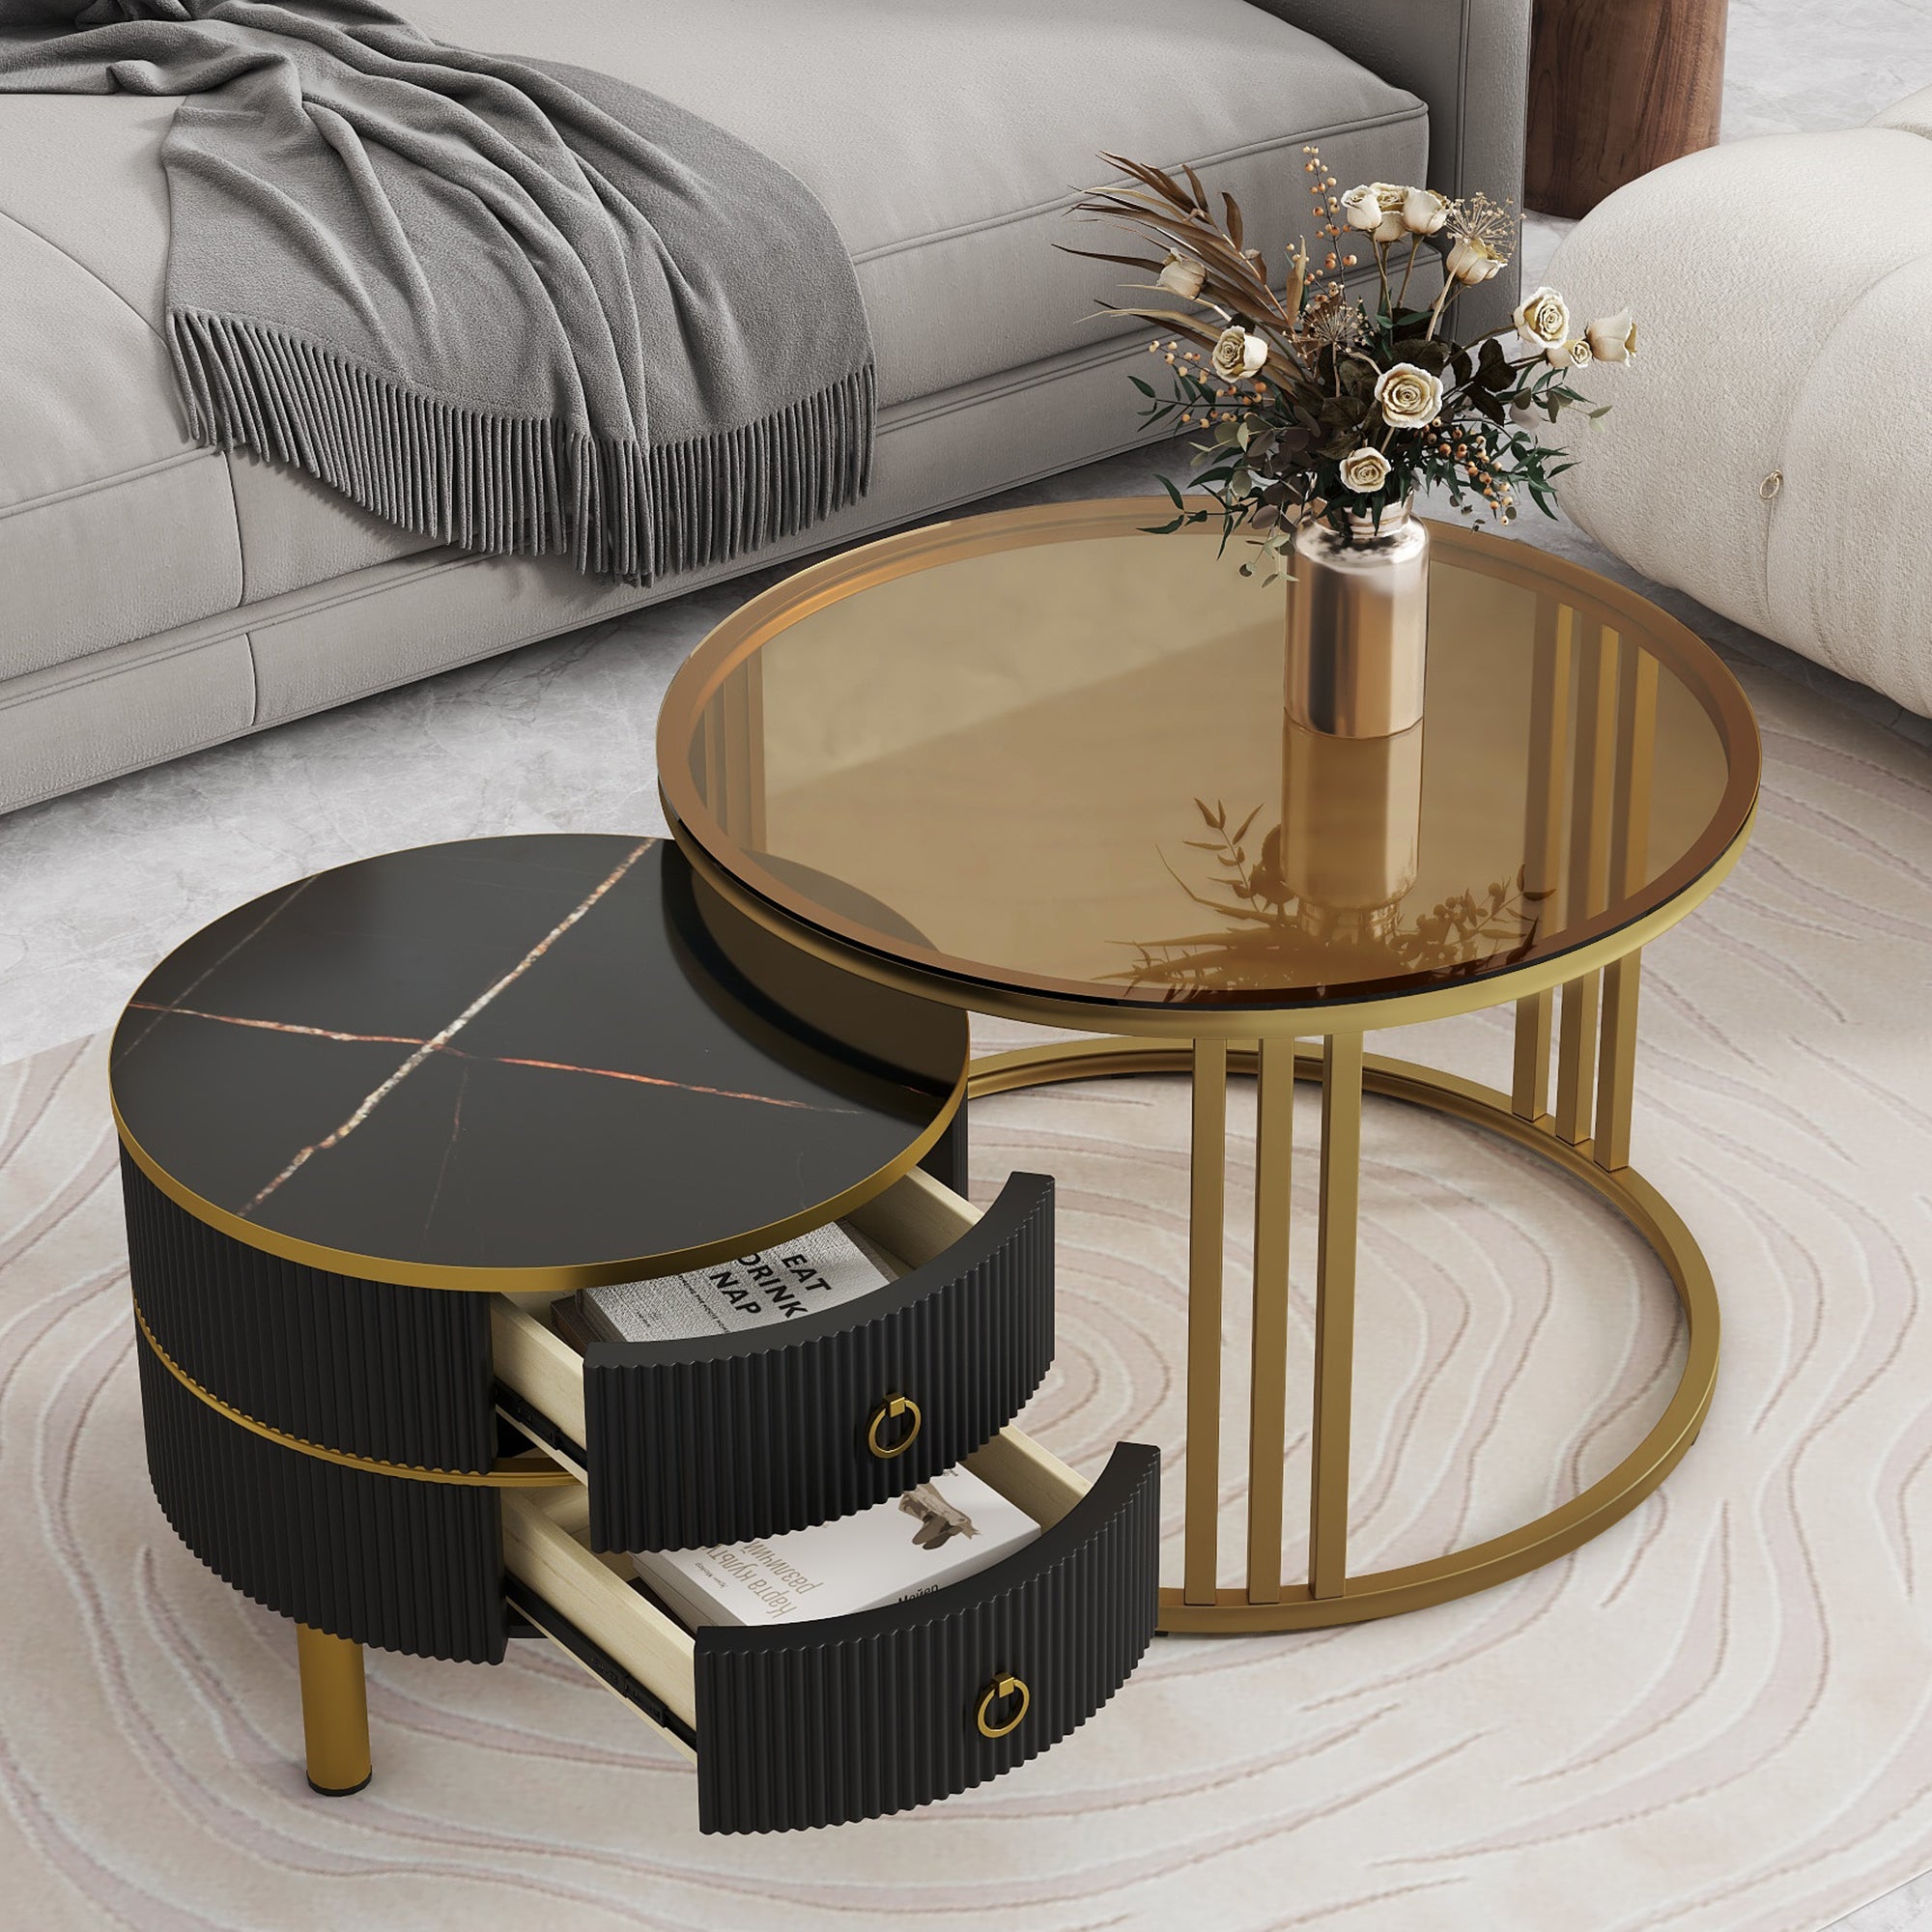 🆓🚛 27.5'' & 19.6'' Stackable Coffee Table With 2 Drawers, Nesting Tables With Brown Tempered Glass and High Gloss Faux Marble Tabletop, Set of 2, Round Center Table for Living Room, Black